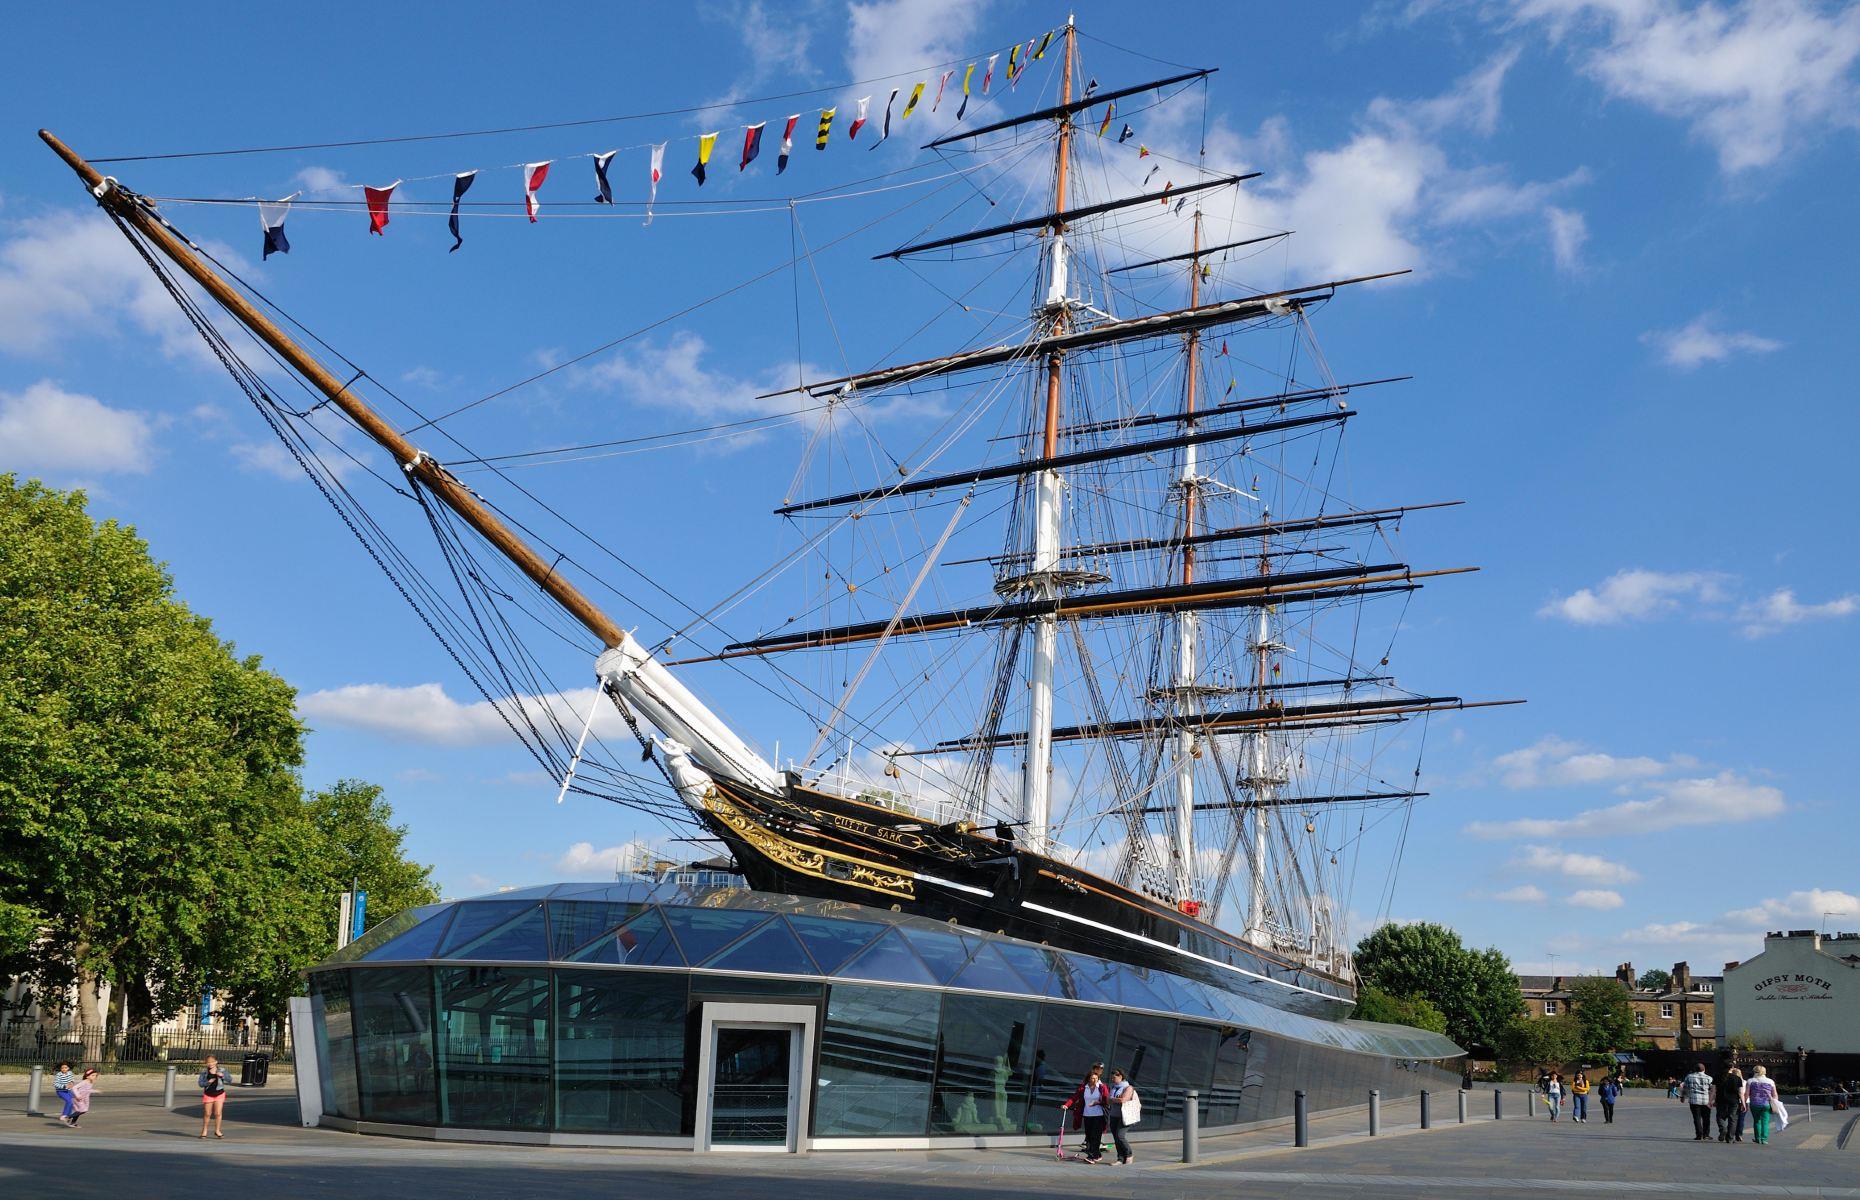 <p>The last tea clipper built in Britain in 1869, the Cutty Sark was the fastest too. Weighing in at 963 tons, she sailed the equivalent of two-and-a-half times the distance to the moon and back through all manner of storms and high seas during her years of service. Essentially a cargo ship, her maiden voyage was to Shanghai, China where she carried 1.3 million lbs of tea back to London. Now part of the Royal Museums Greenwich in London, the <a href="https://www.rmg.co.uk/cutty-sark">Cutty Sark</a> has been open to visitors for 60 years.</p>